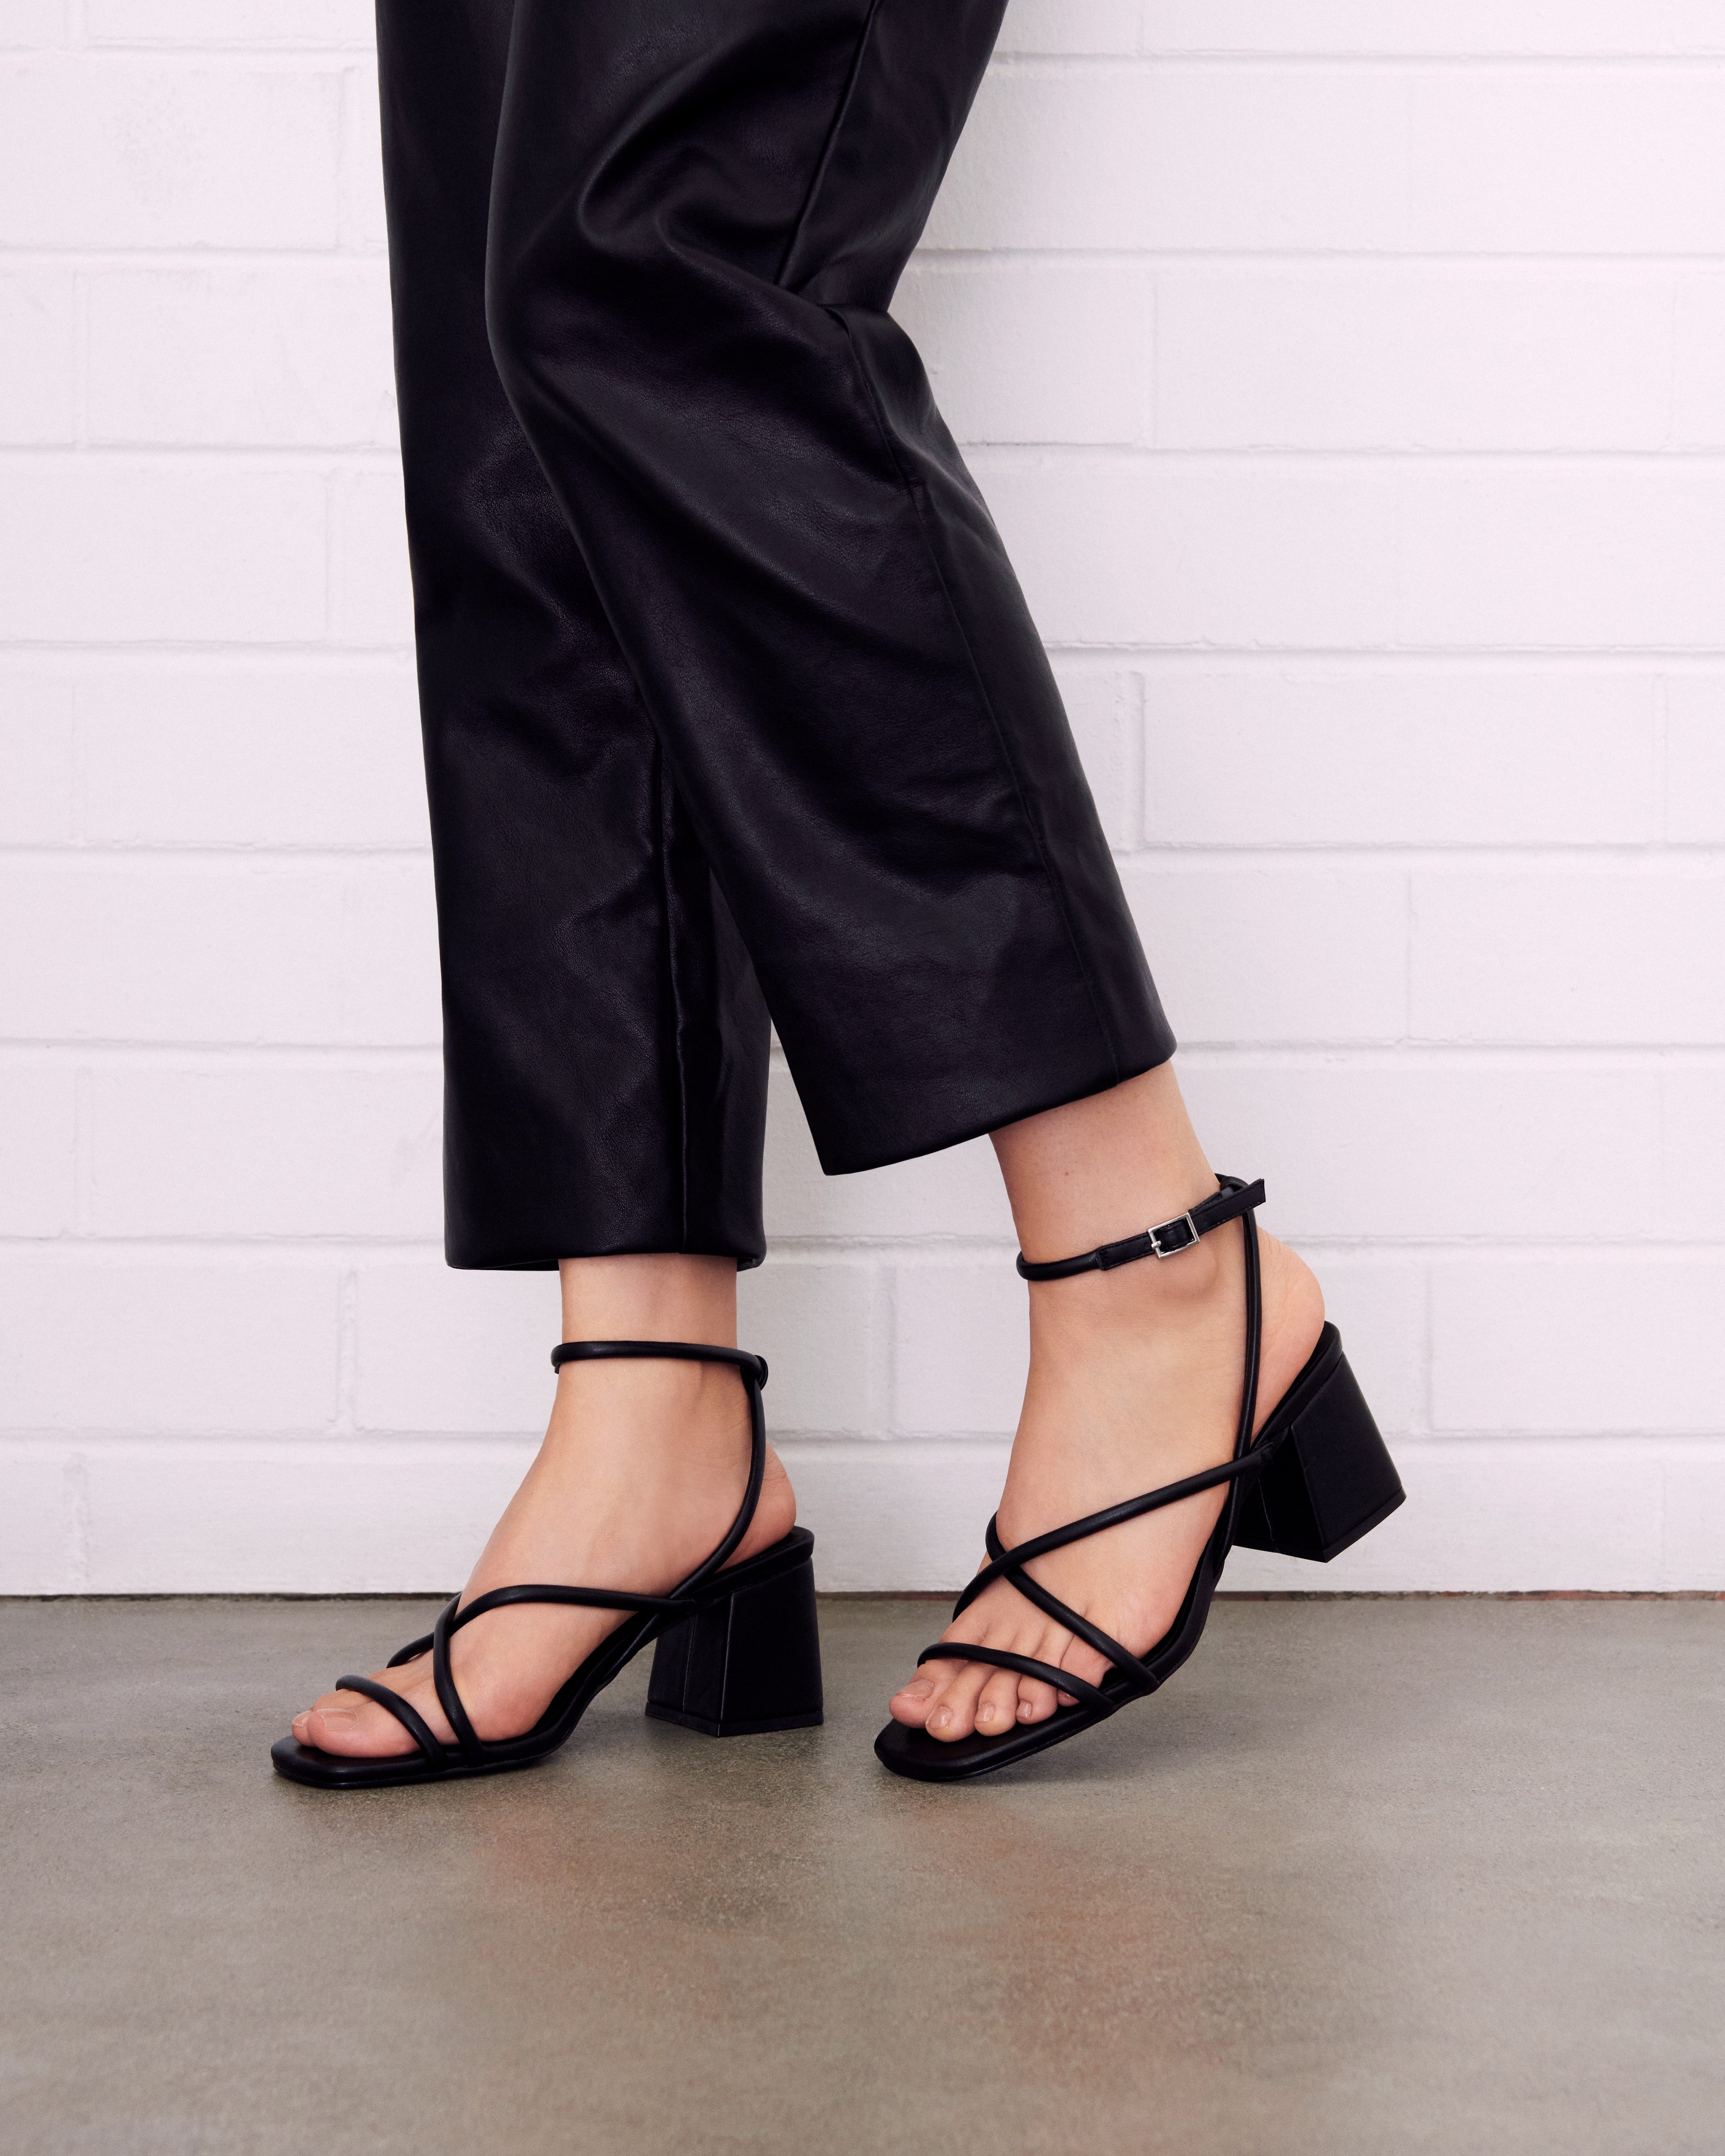 Therapy Shoes Harper Black | Women's Heels | Sandals | Strappy